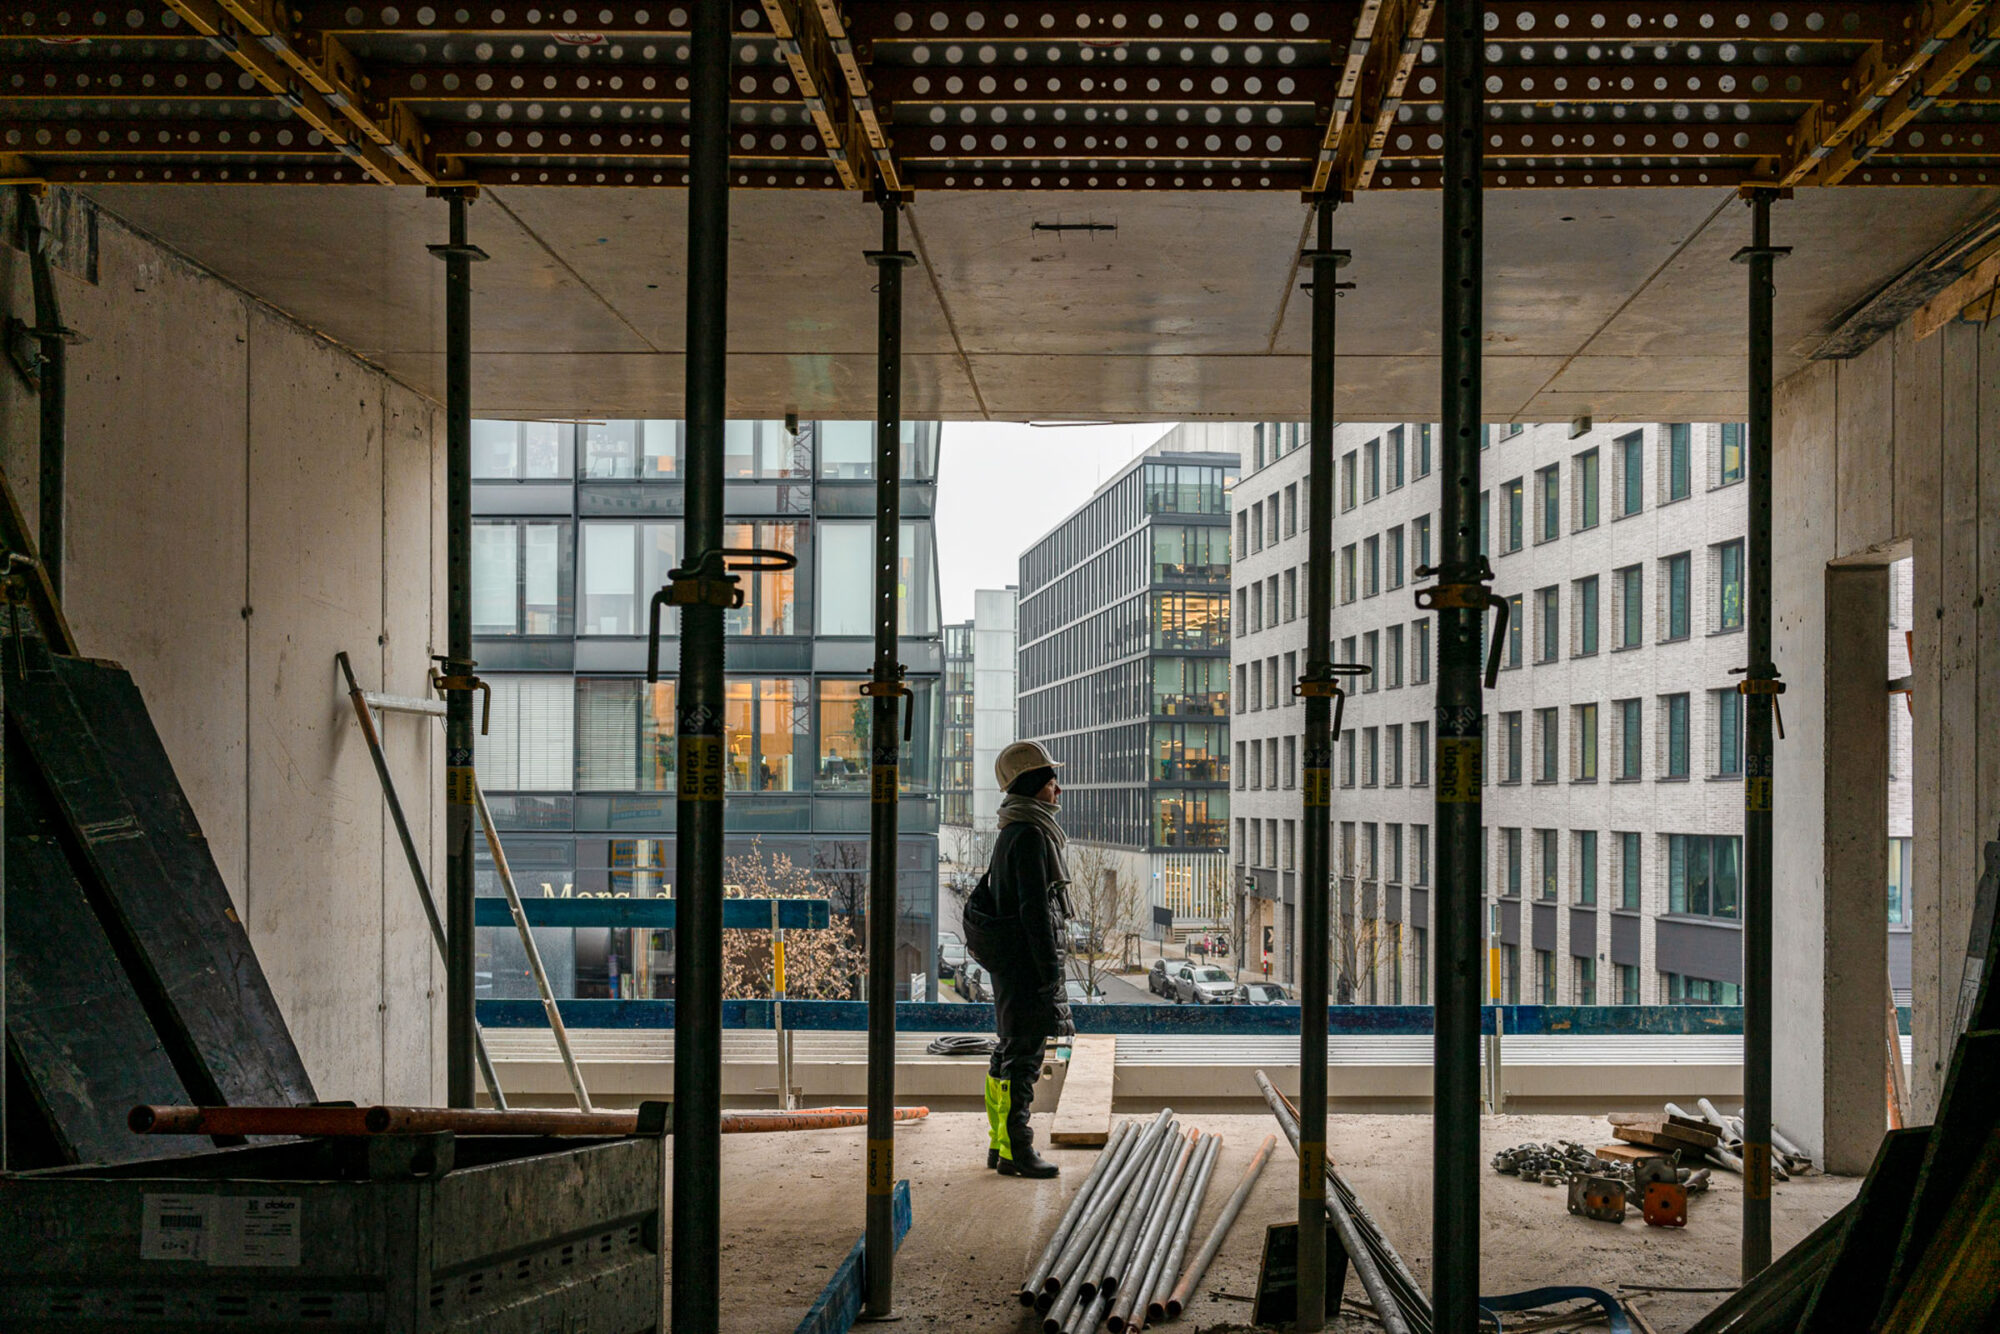 On the construction site of Pier 61|63 in Berlin